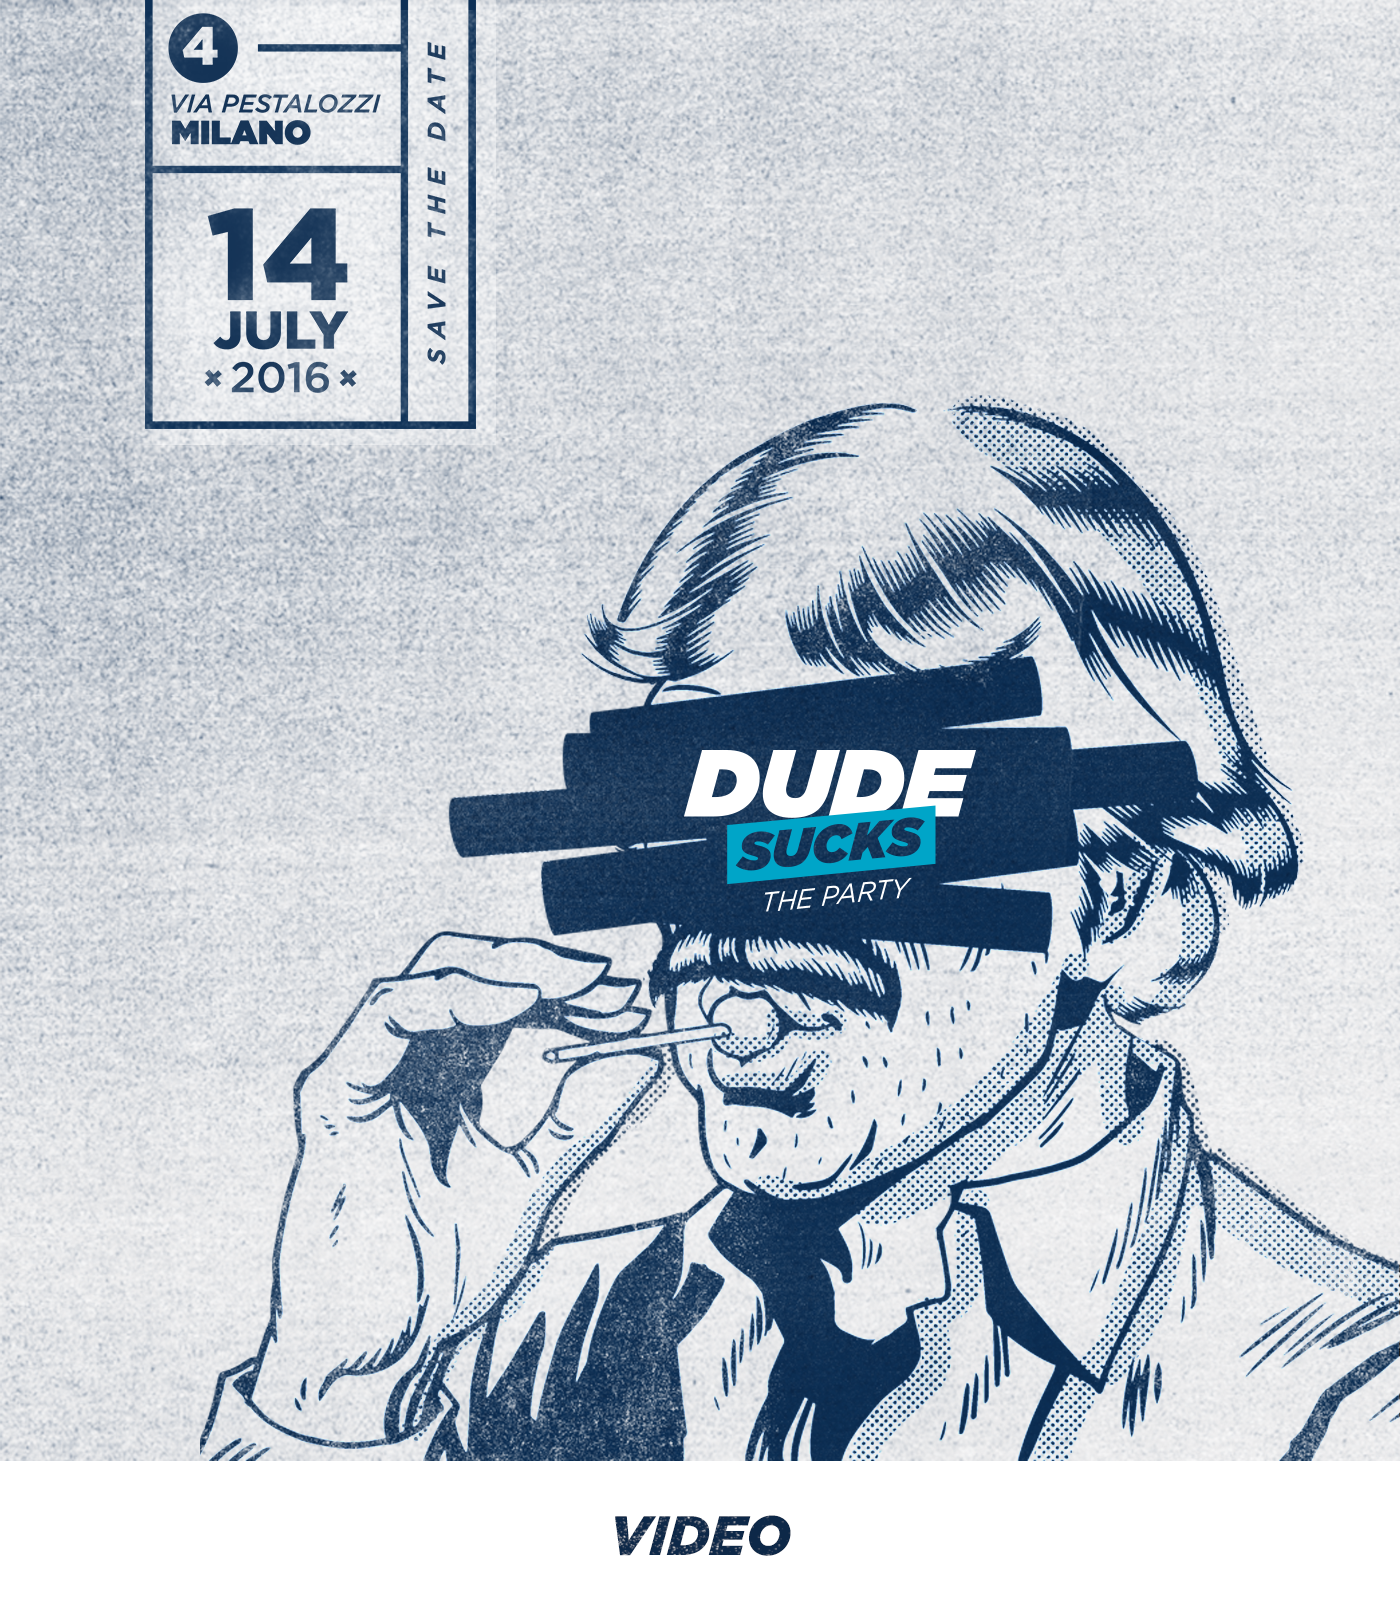 dude Advertising  agency party haters graphic theme party milan advagency